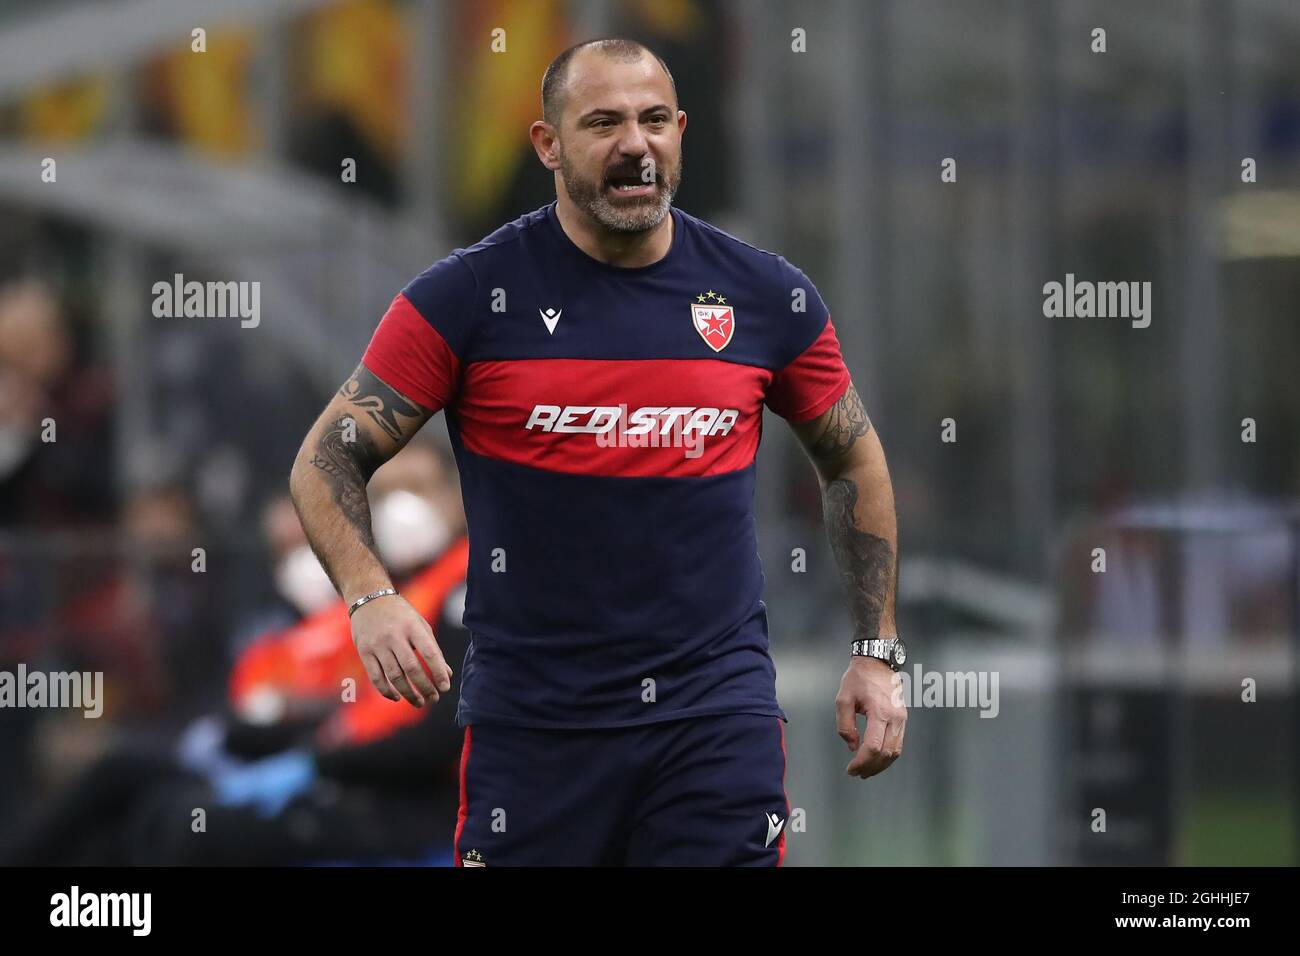 Dejan Stankovic Head coach of FK Crvena zvezda reacts during the UEFA  Europa League match at Giuseppe Meazza, Milan. Picture date: 25th February  2021. Picture credit should read: Jonathan Moscrop/Sportimage via PA